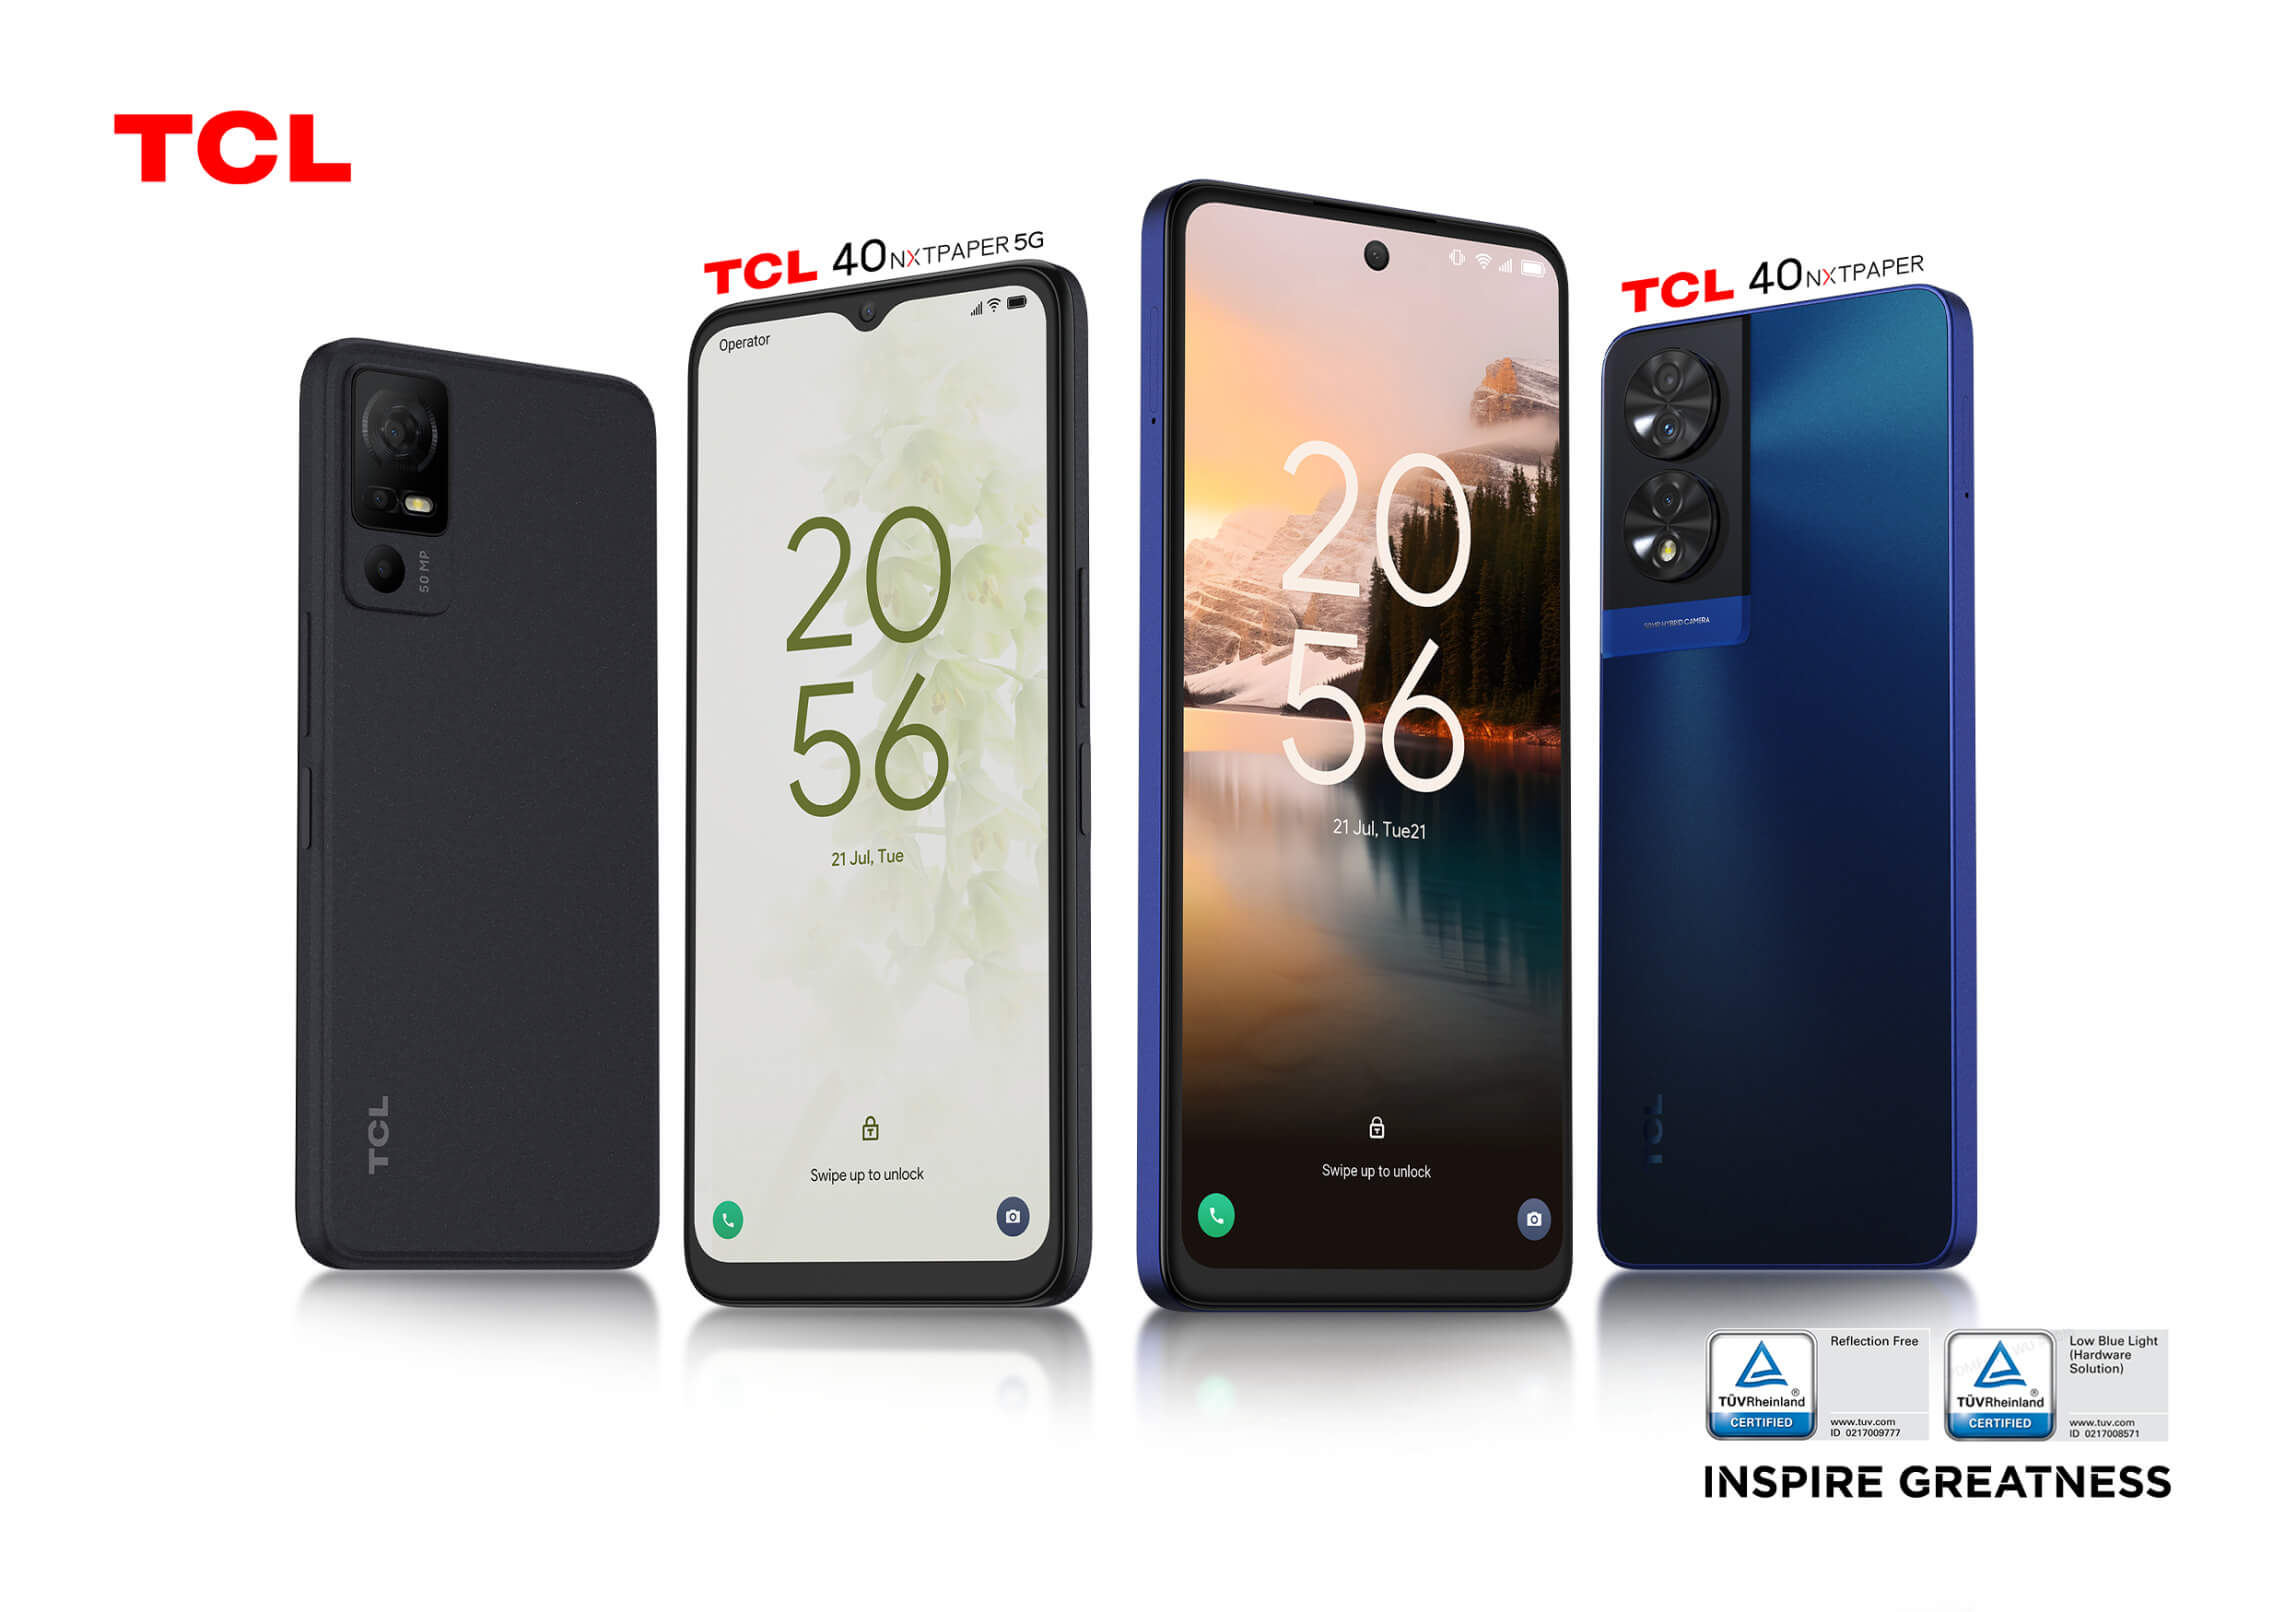 TCL just announced seven new Android phones